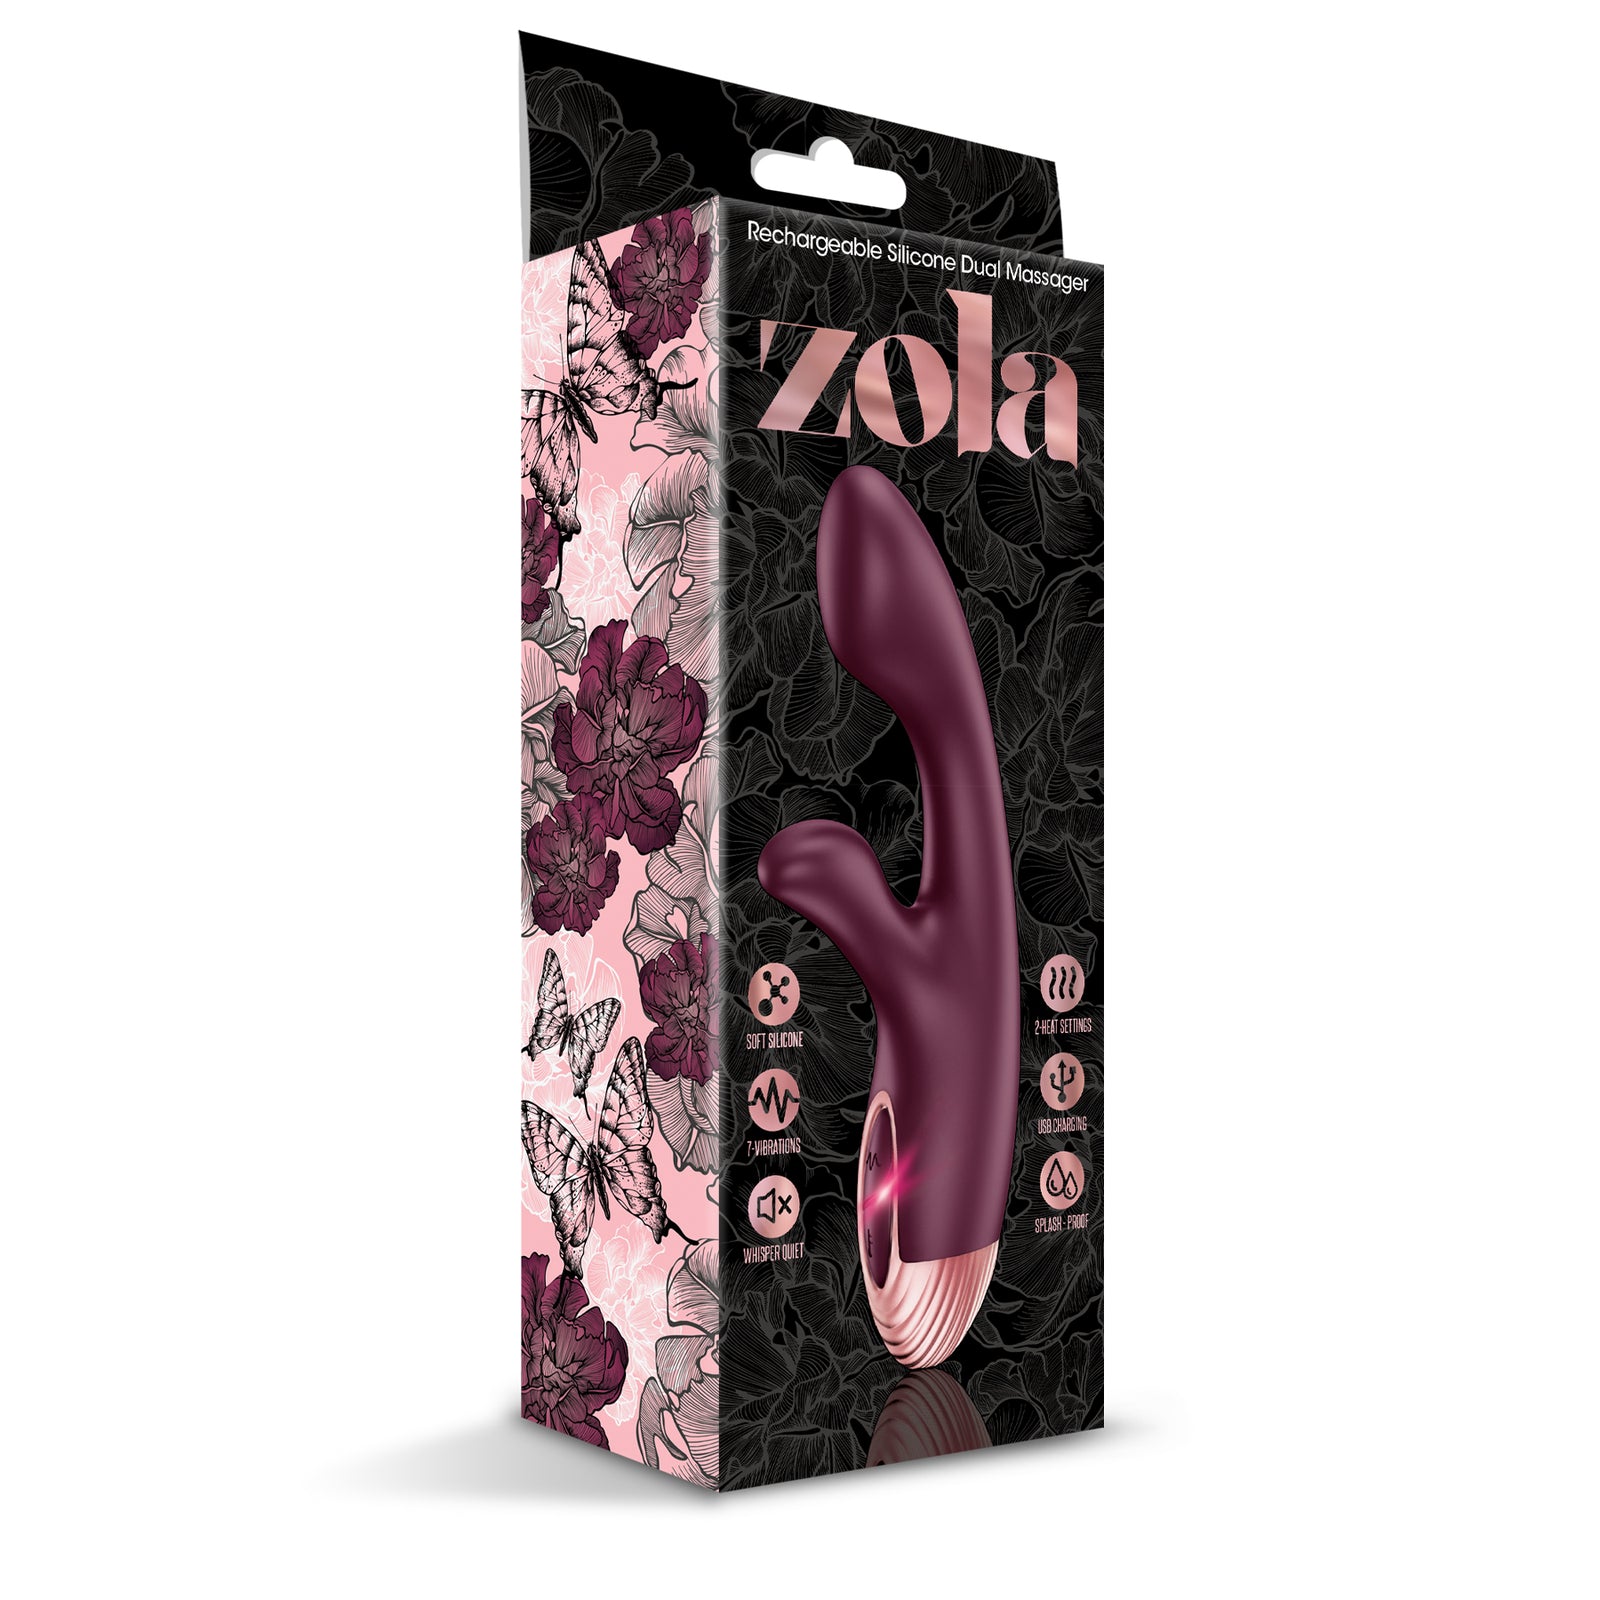 Zola Rechargeable Silicone Warming Dual Massager, Burgundy - THES